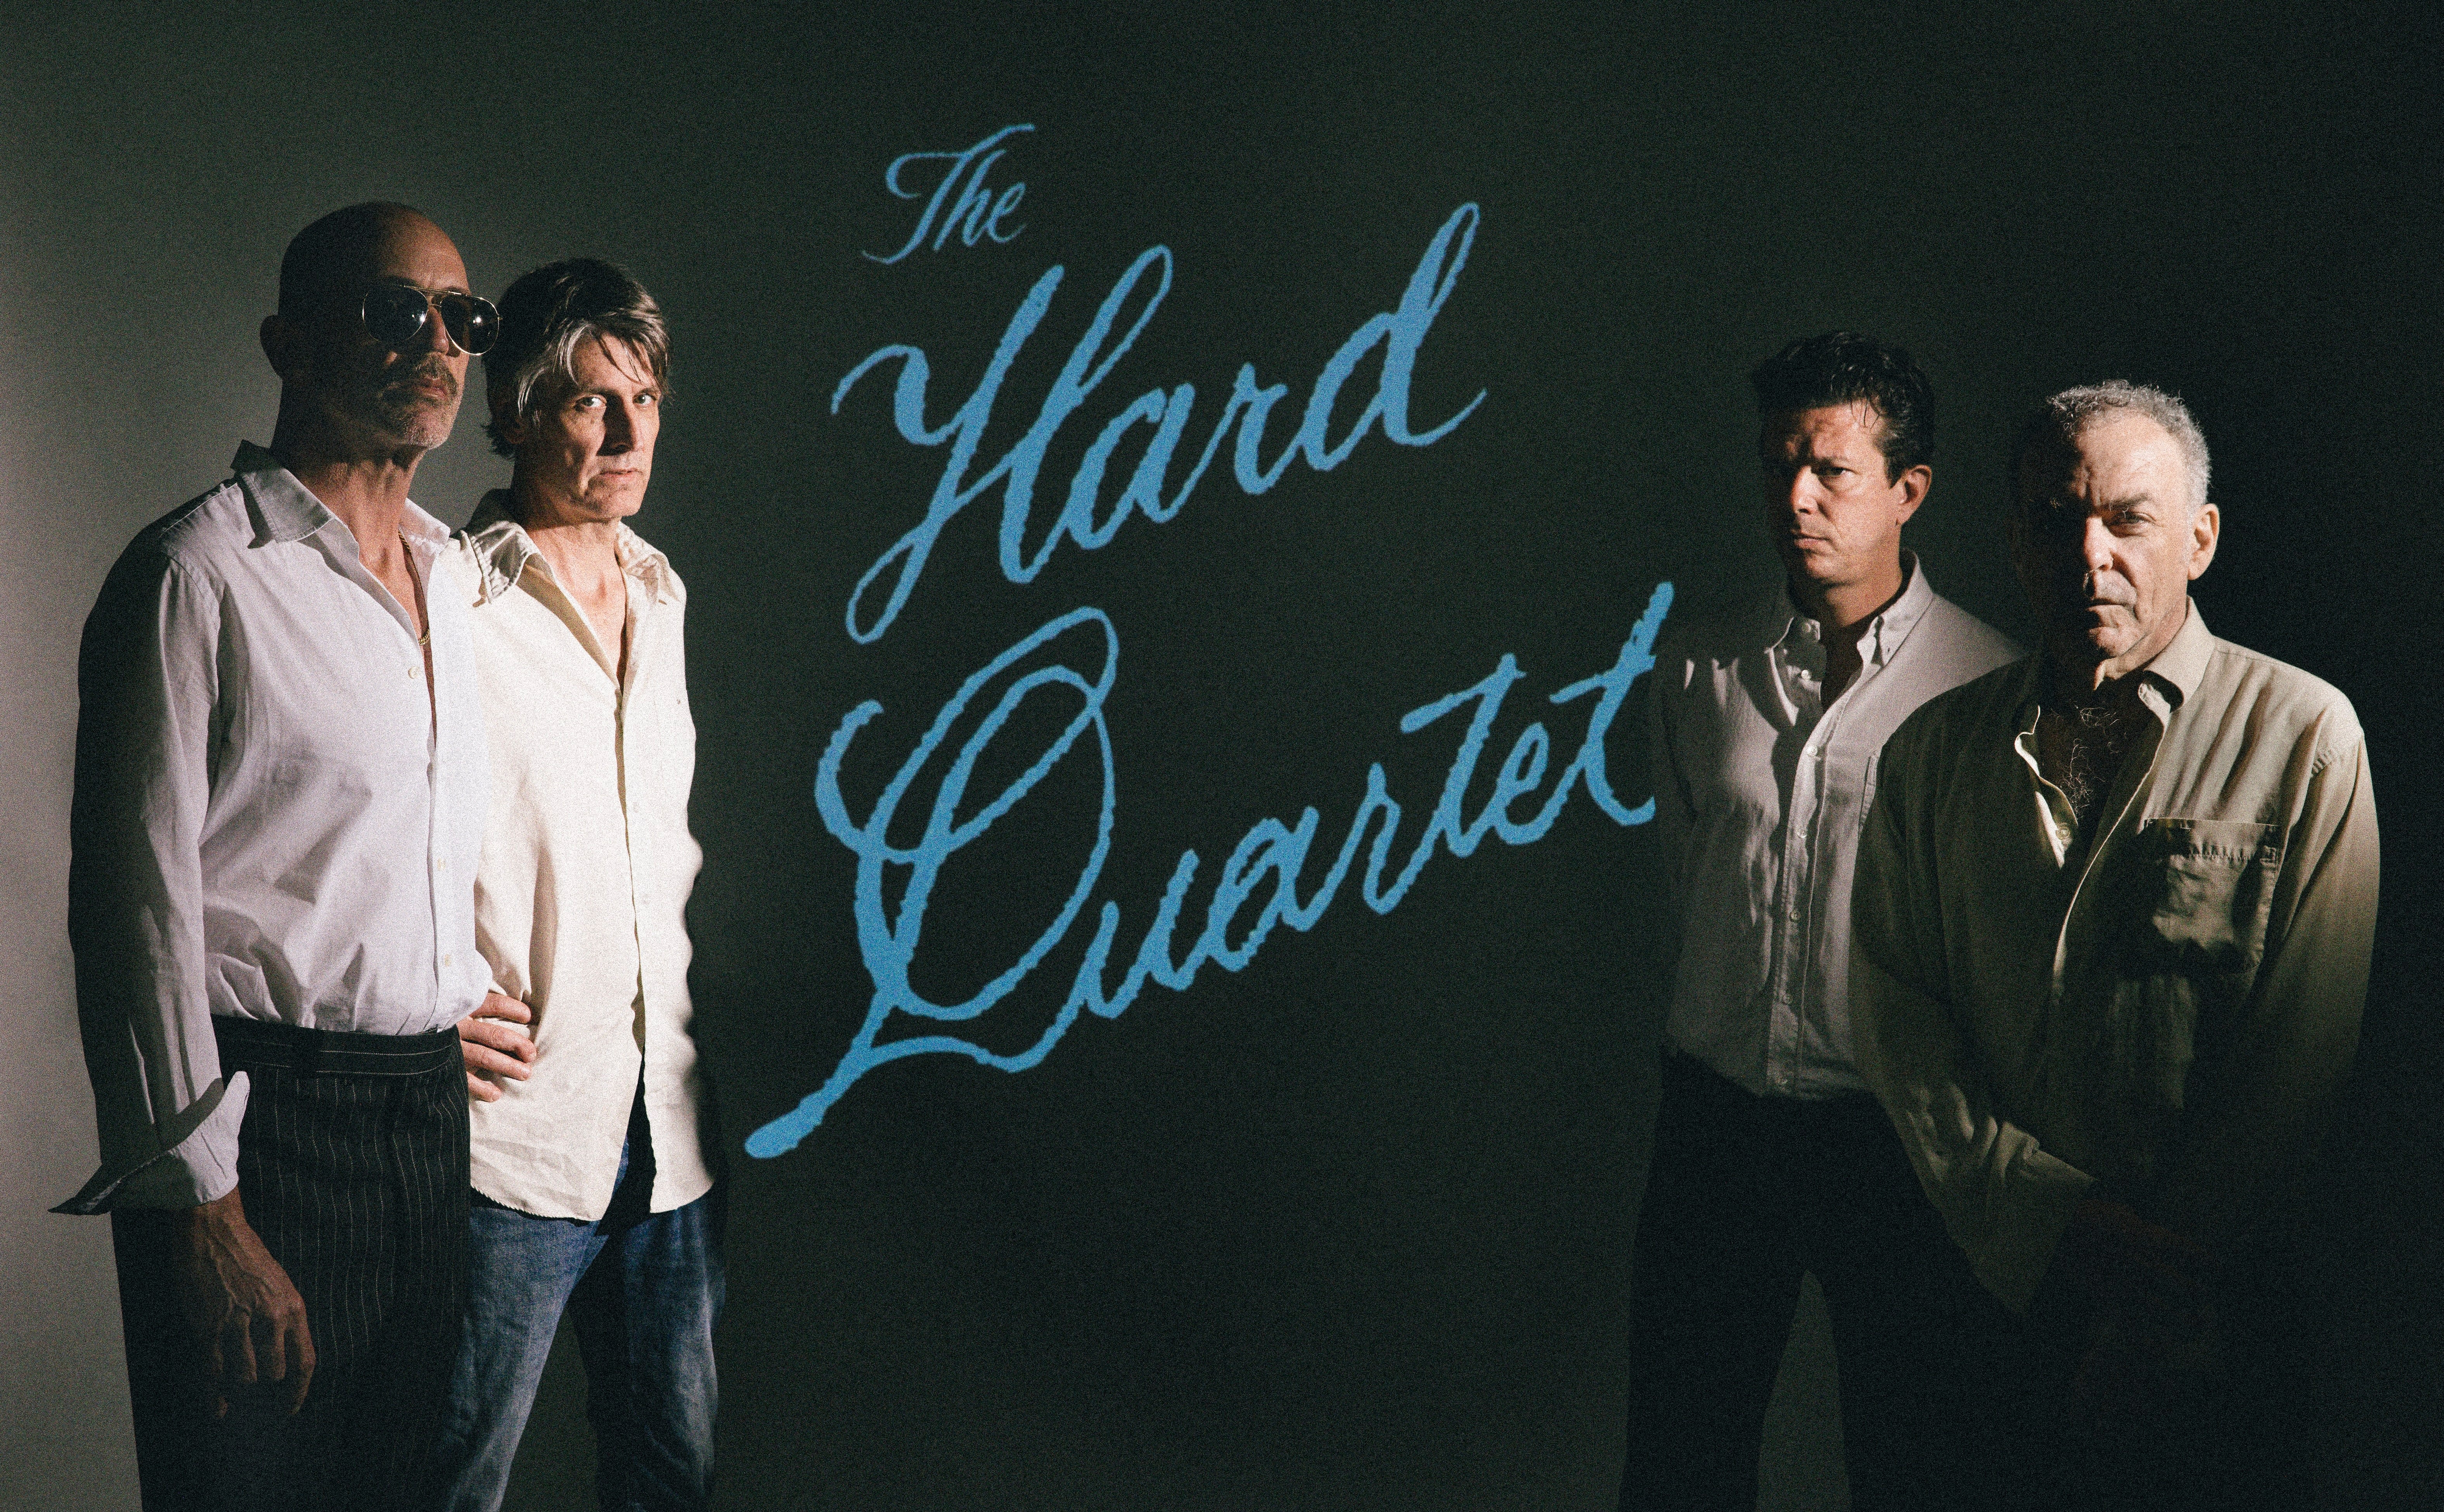 The Hard Quartet Announce Debut Live Shows, Share Video for New Song “Earth Hater”: Watch